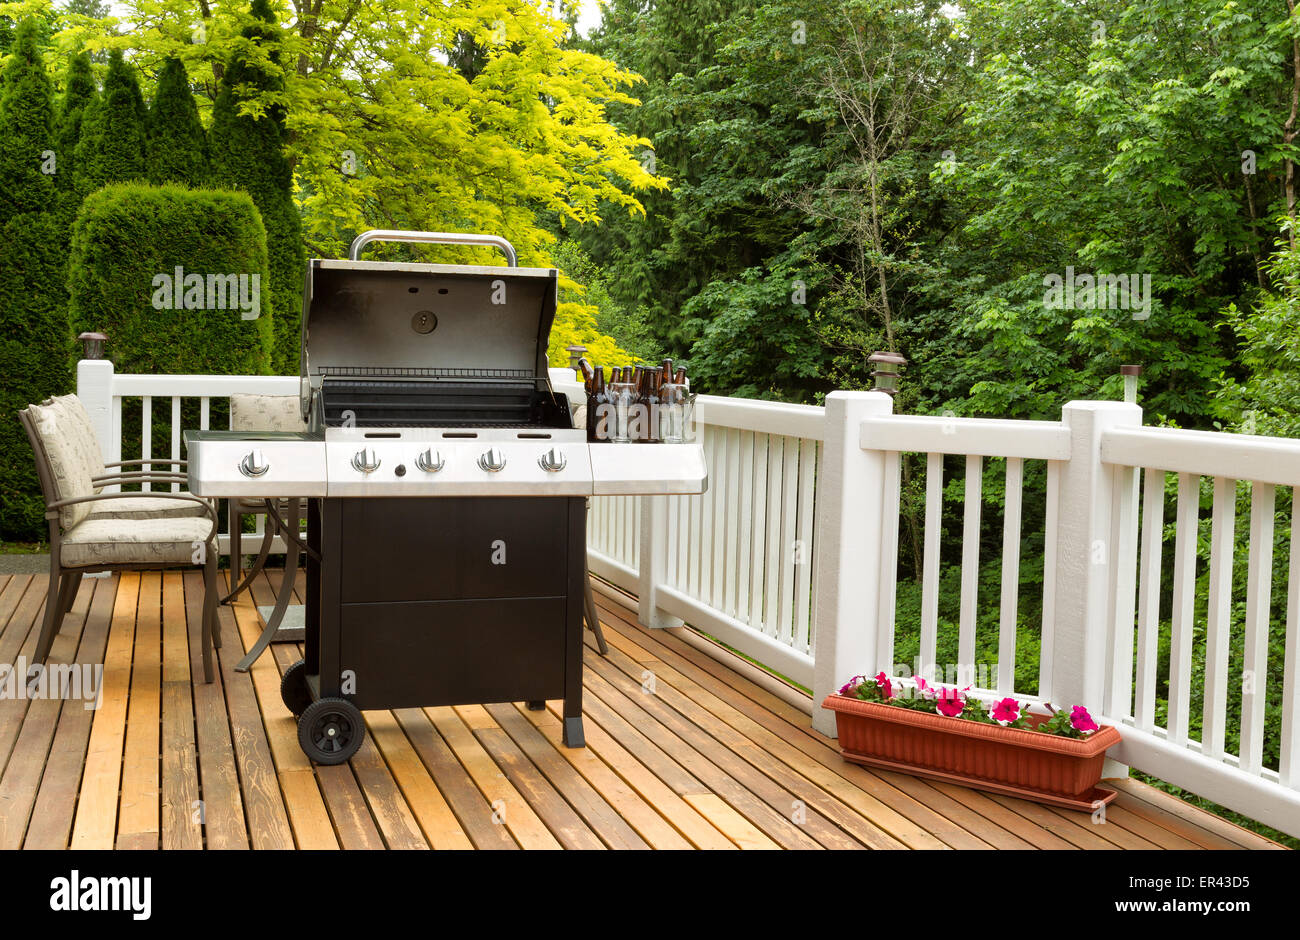 Photo of an open barbecue cooker with cold beer in bucket on cedar wooden patio. Table and colorful trees in background. Stock Photo